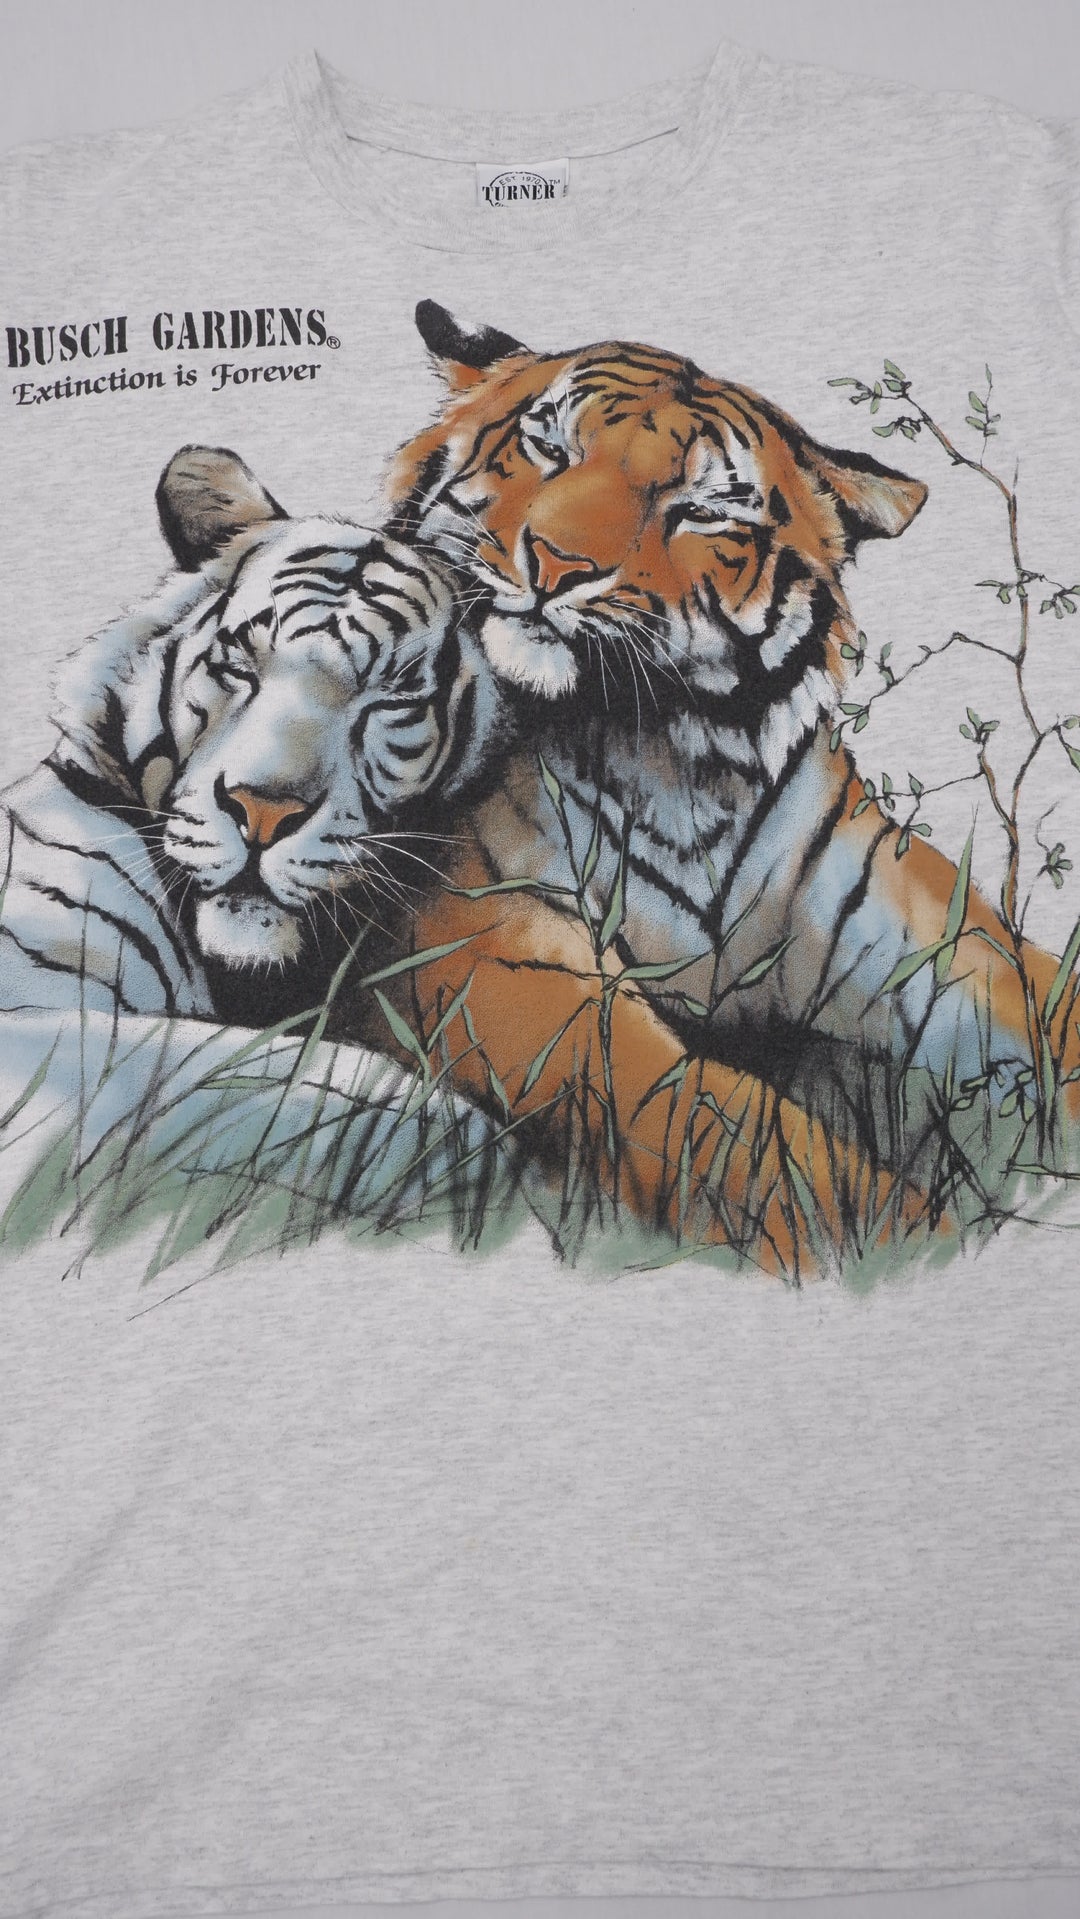 Vintage 94 Busch Gardens Extinction Is Forever Tiger T-Shirt Single Stitch Made In USA